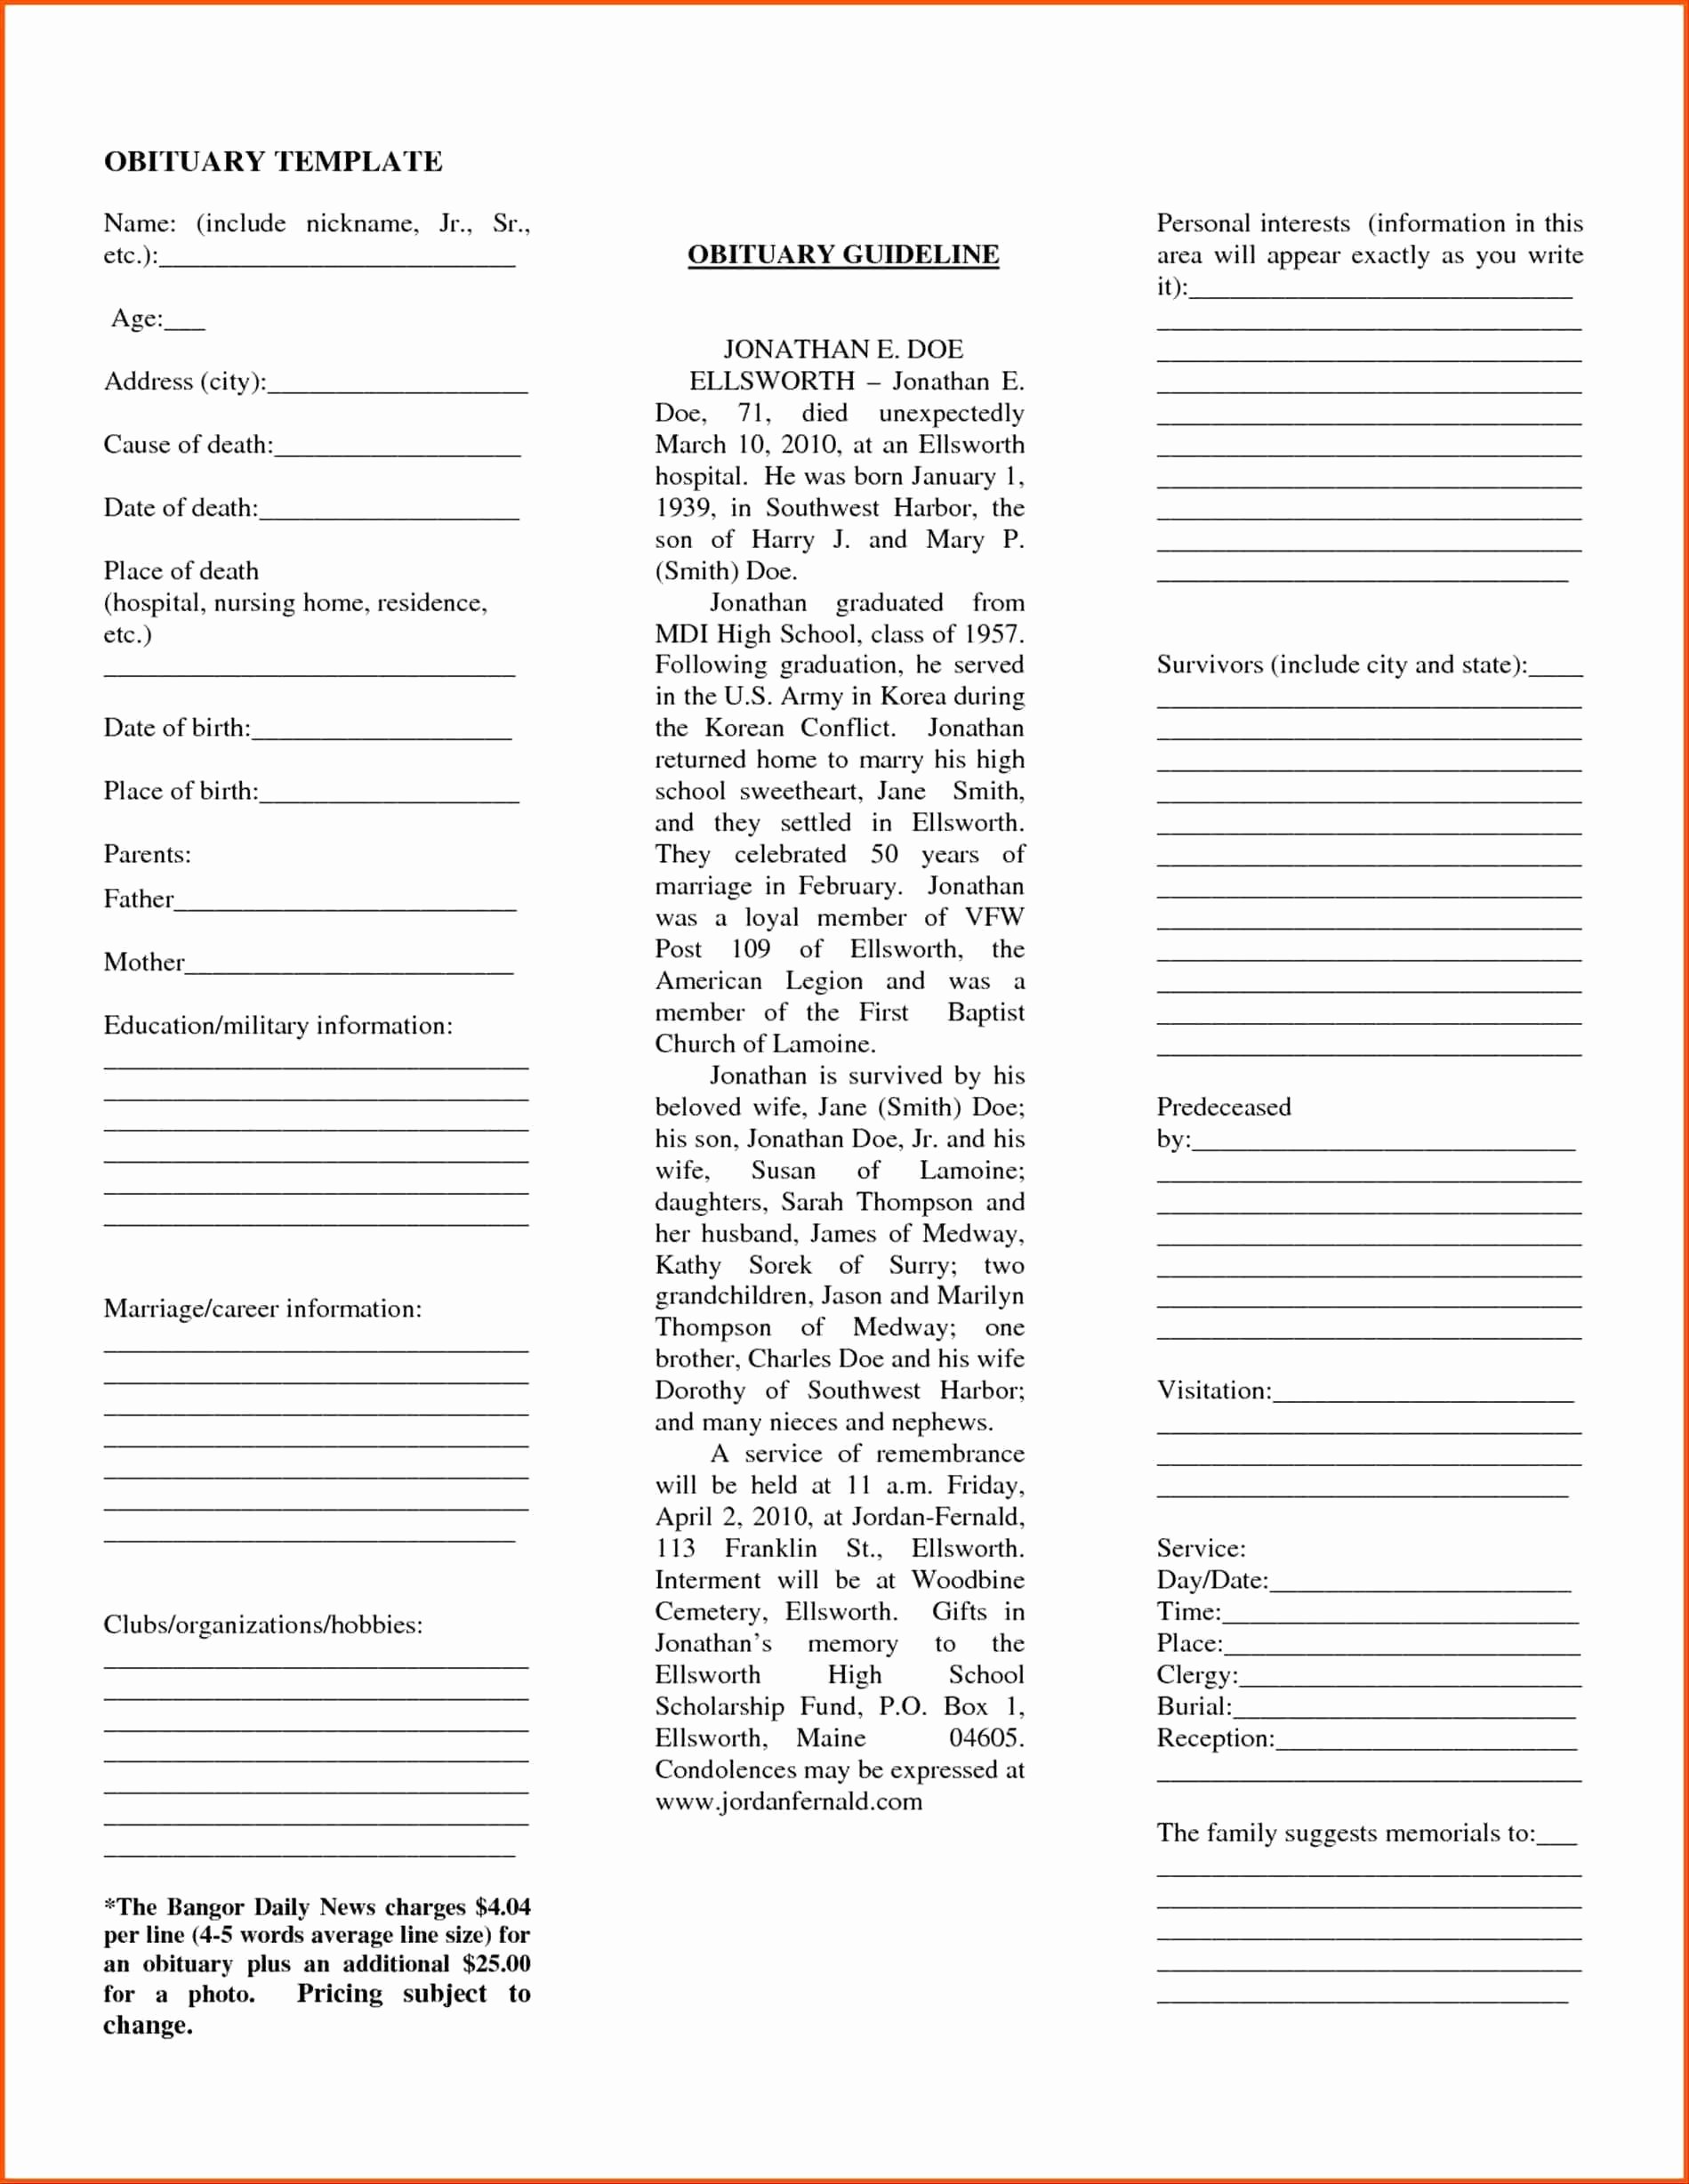 Obituary Template Google Docs Inspirational Exclusive Stock Fill In the Blank Obituary Template